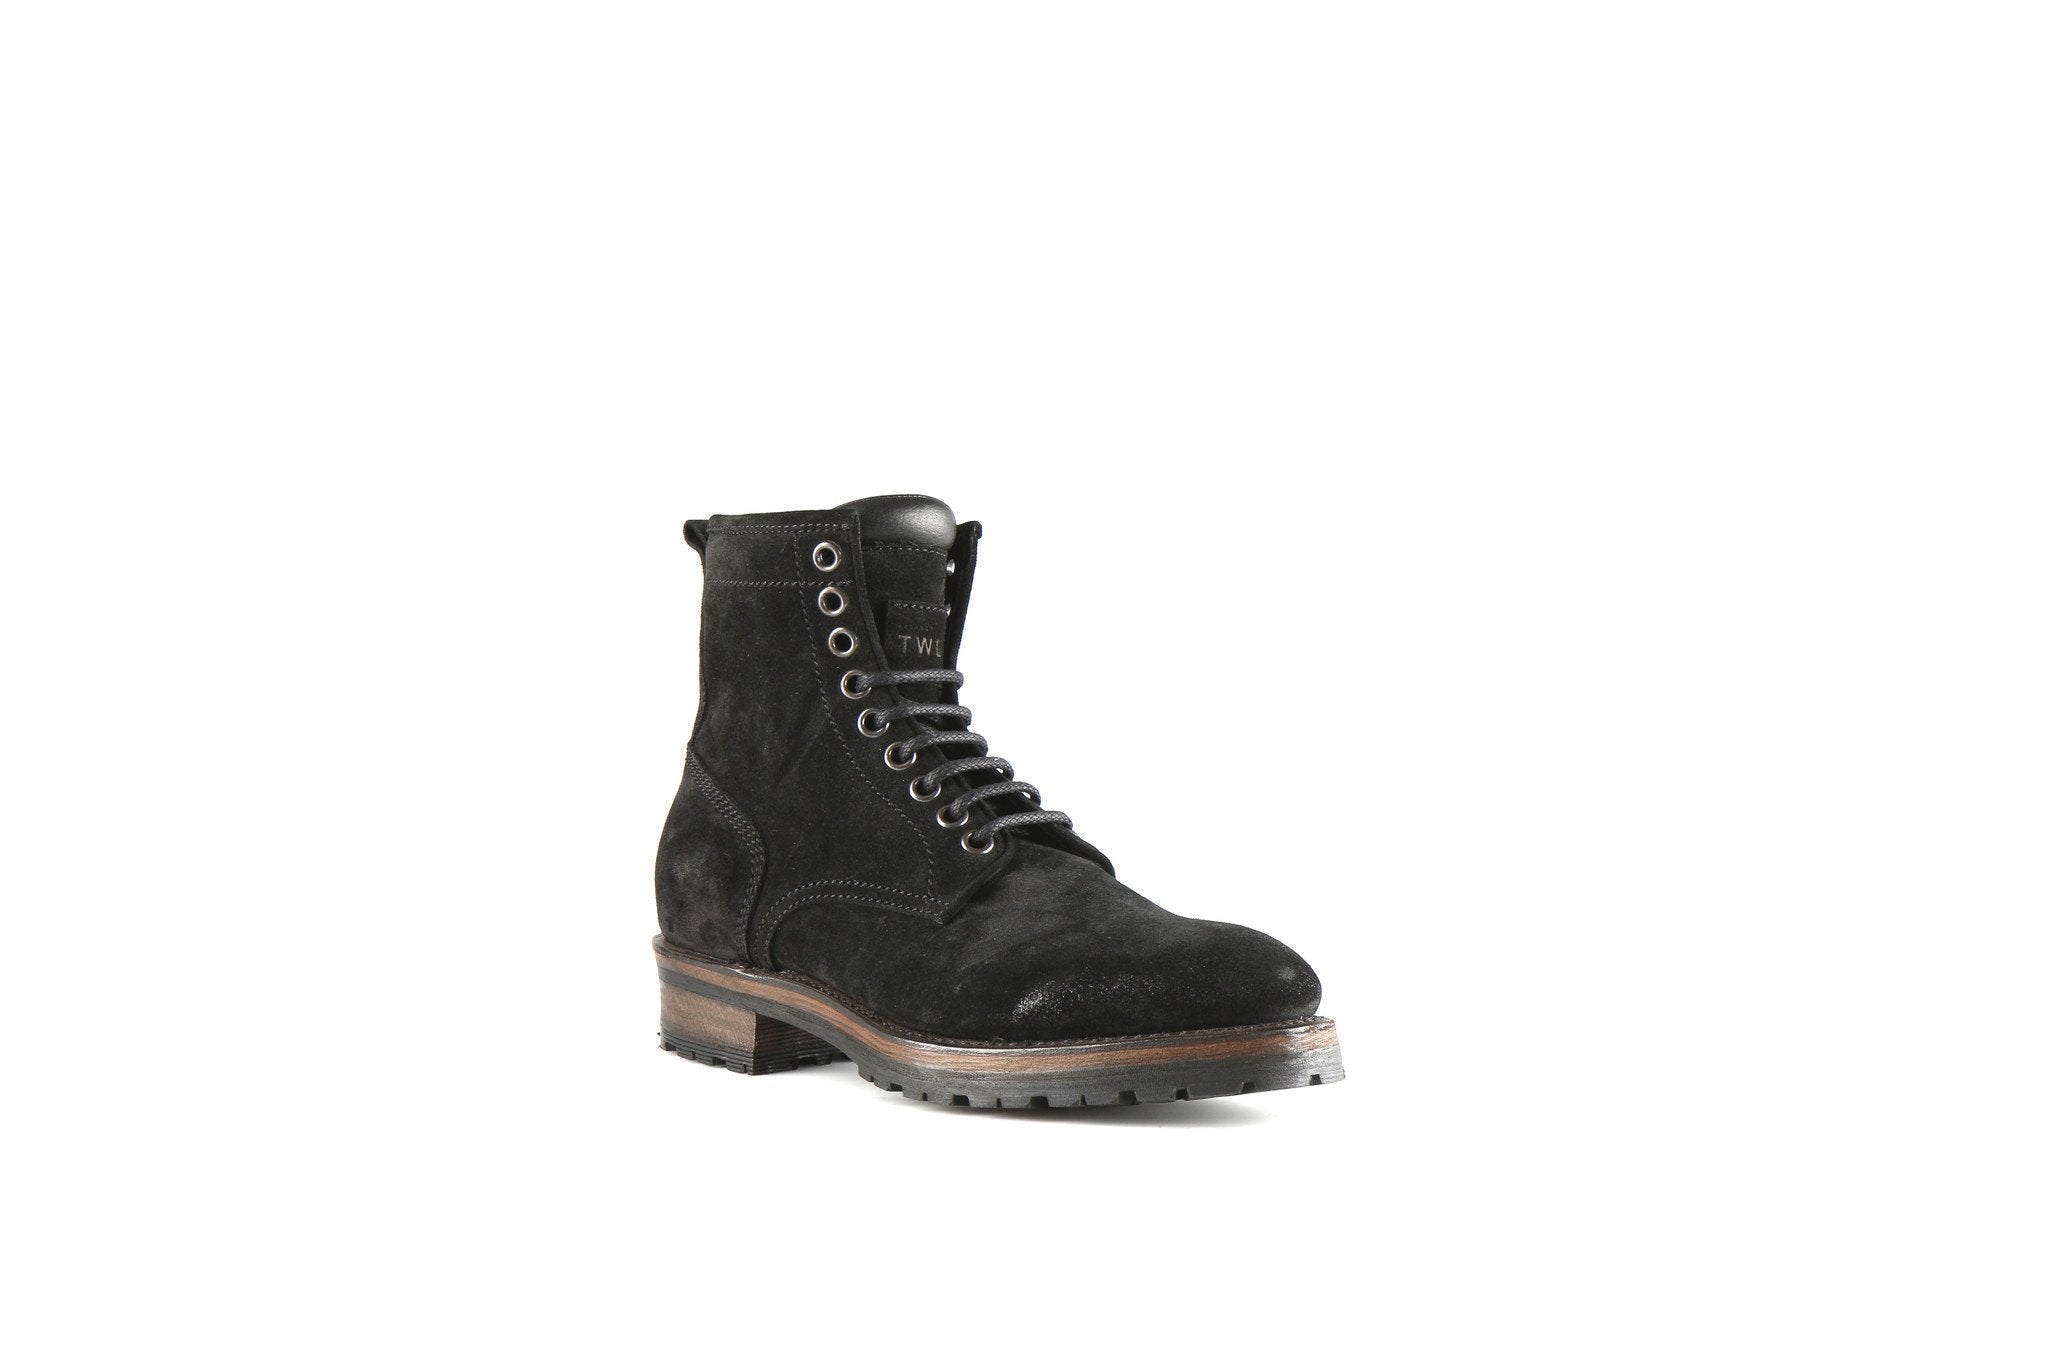 Royal Black Suede Leather Logger Boots – Project TWLV